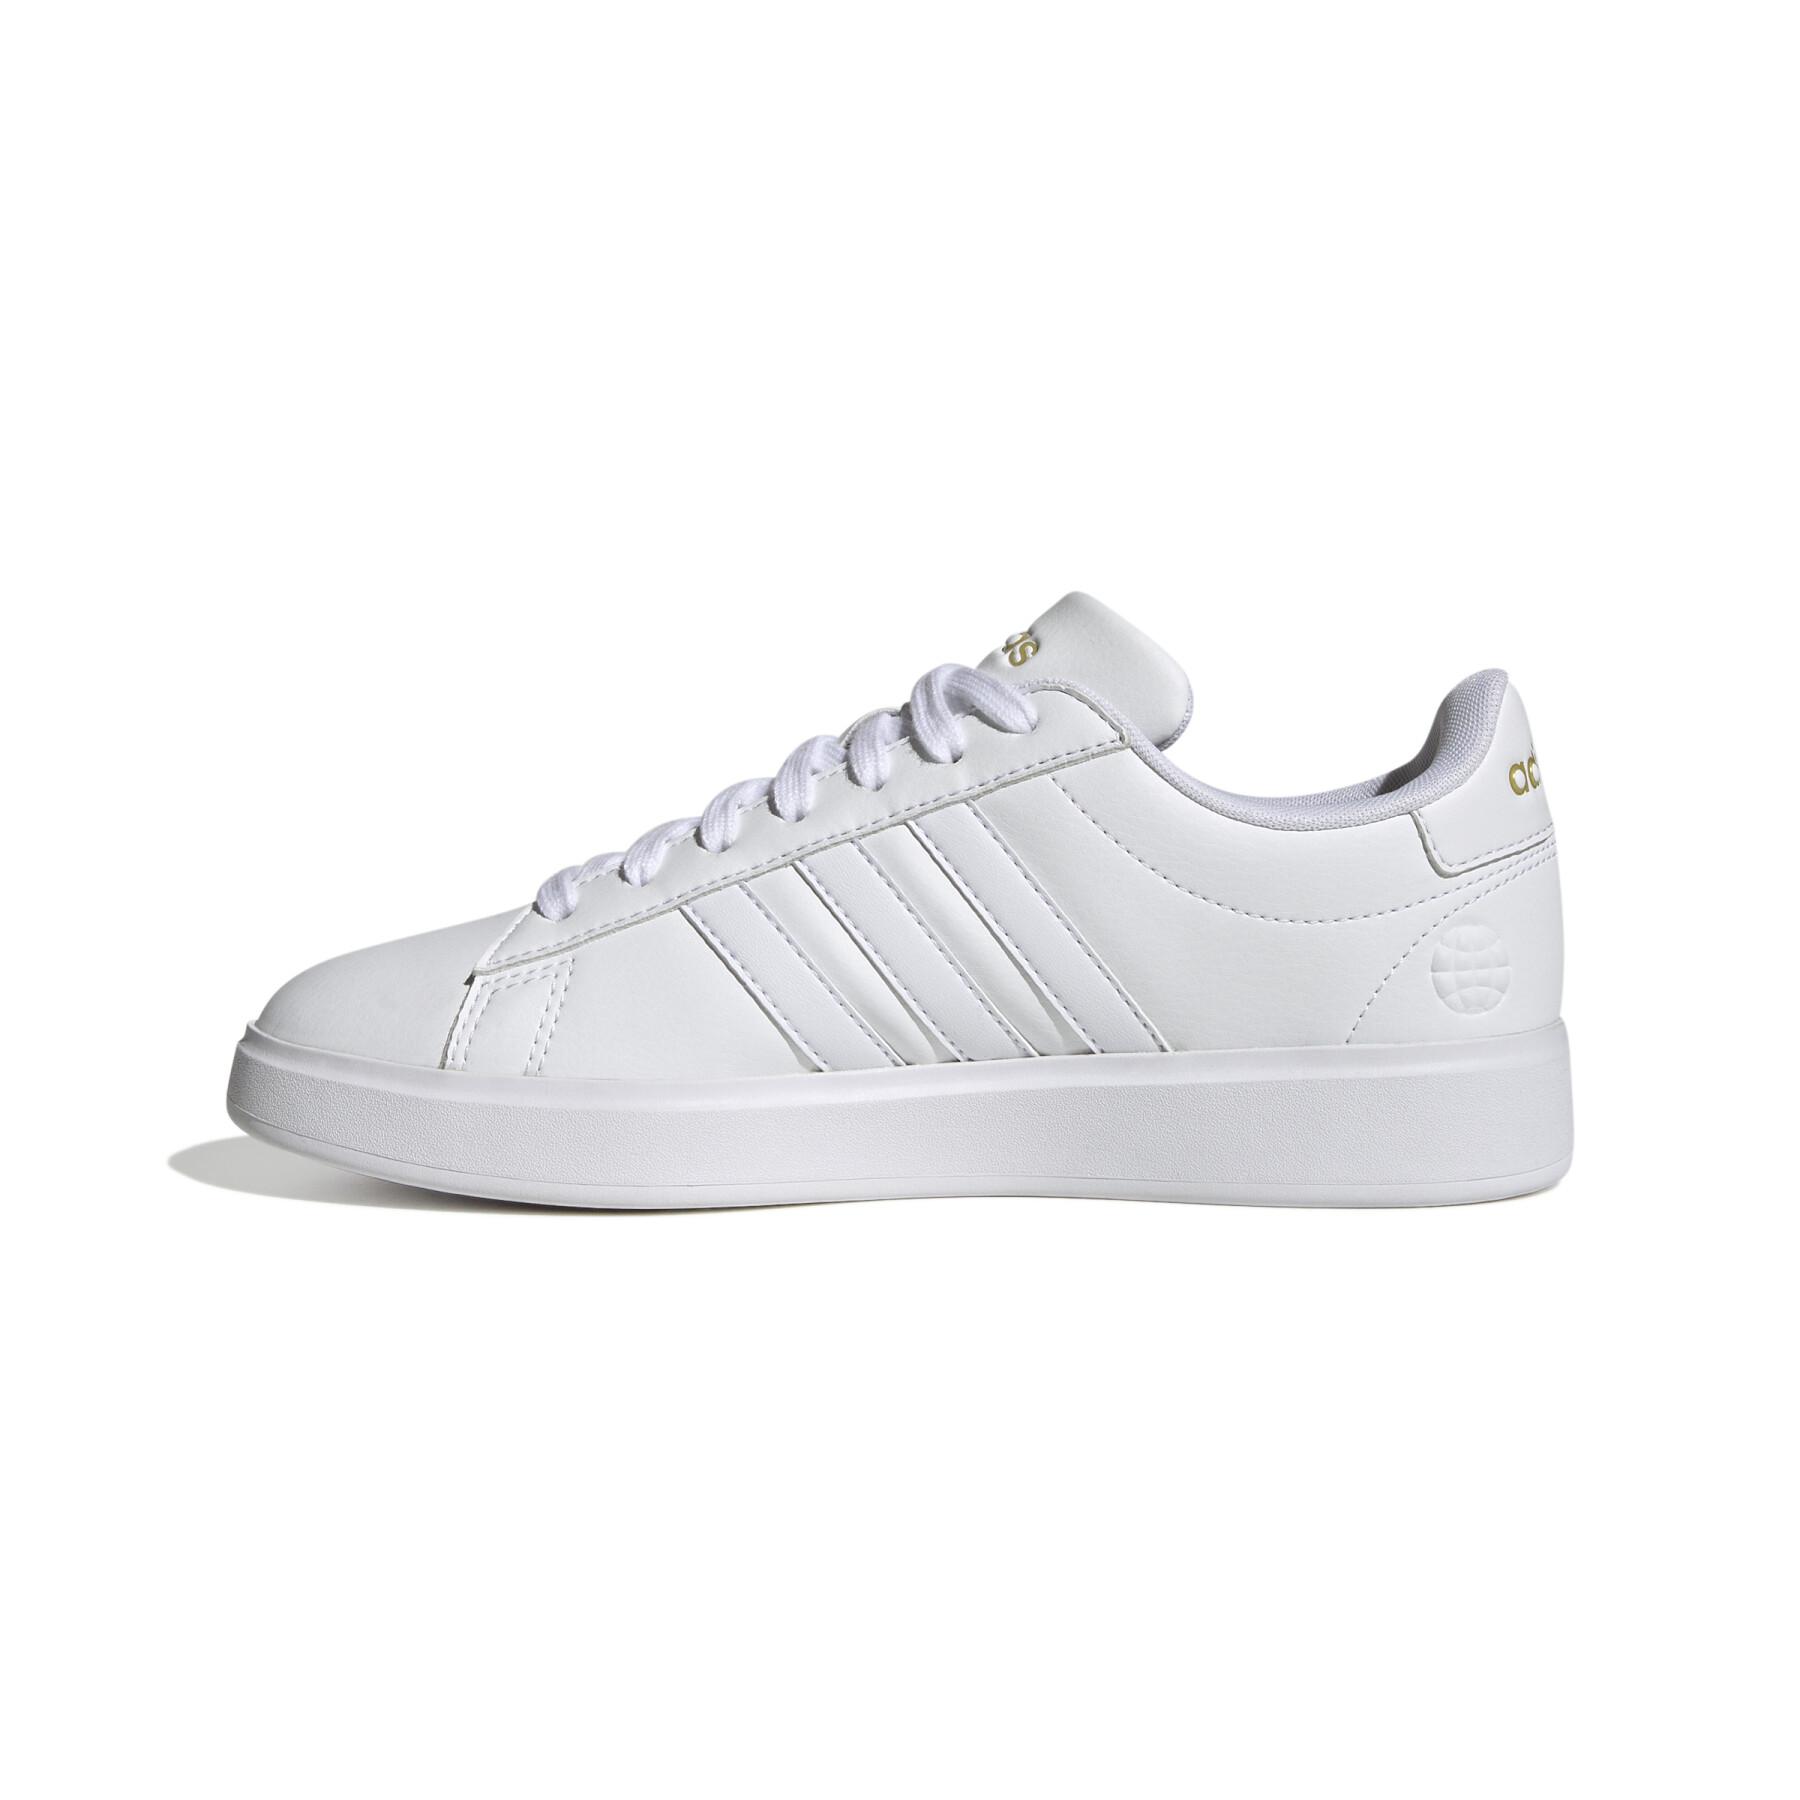 Women's comfortable large court sneakers adidas Cloudfoam